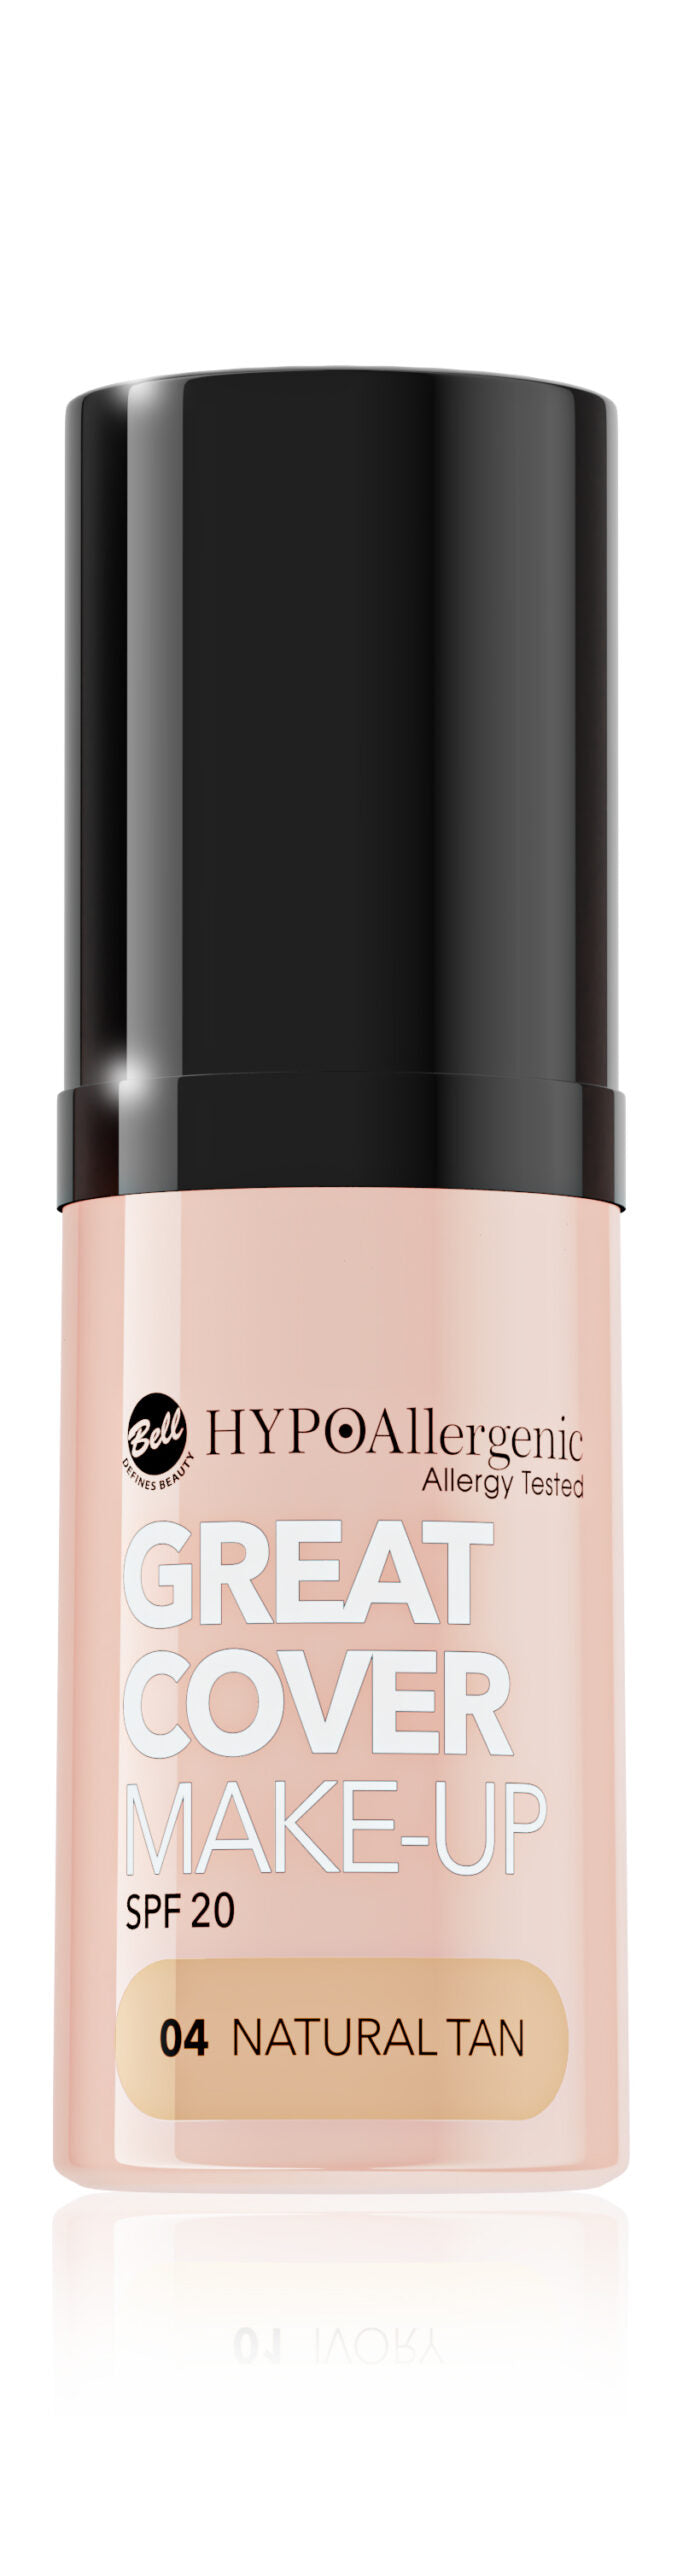 

Hypoallergenic Great Cover Make Up High Coverage Mousse Foundation SPF20 20g